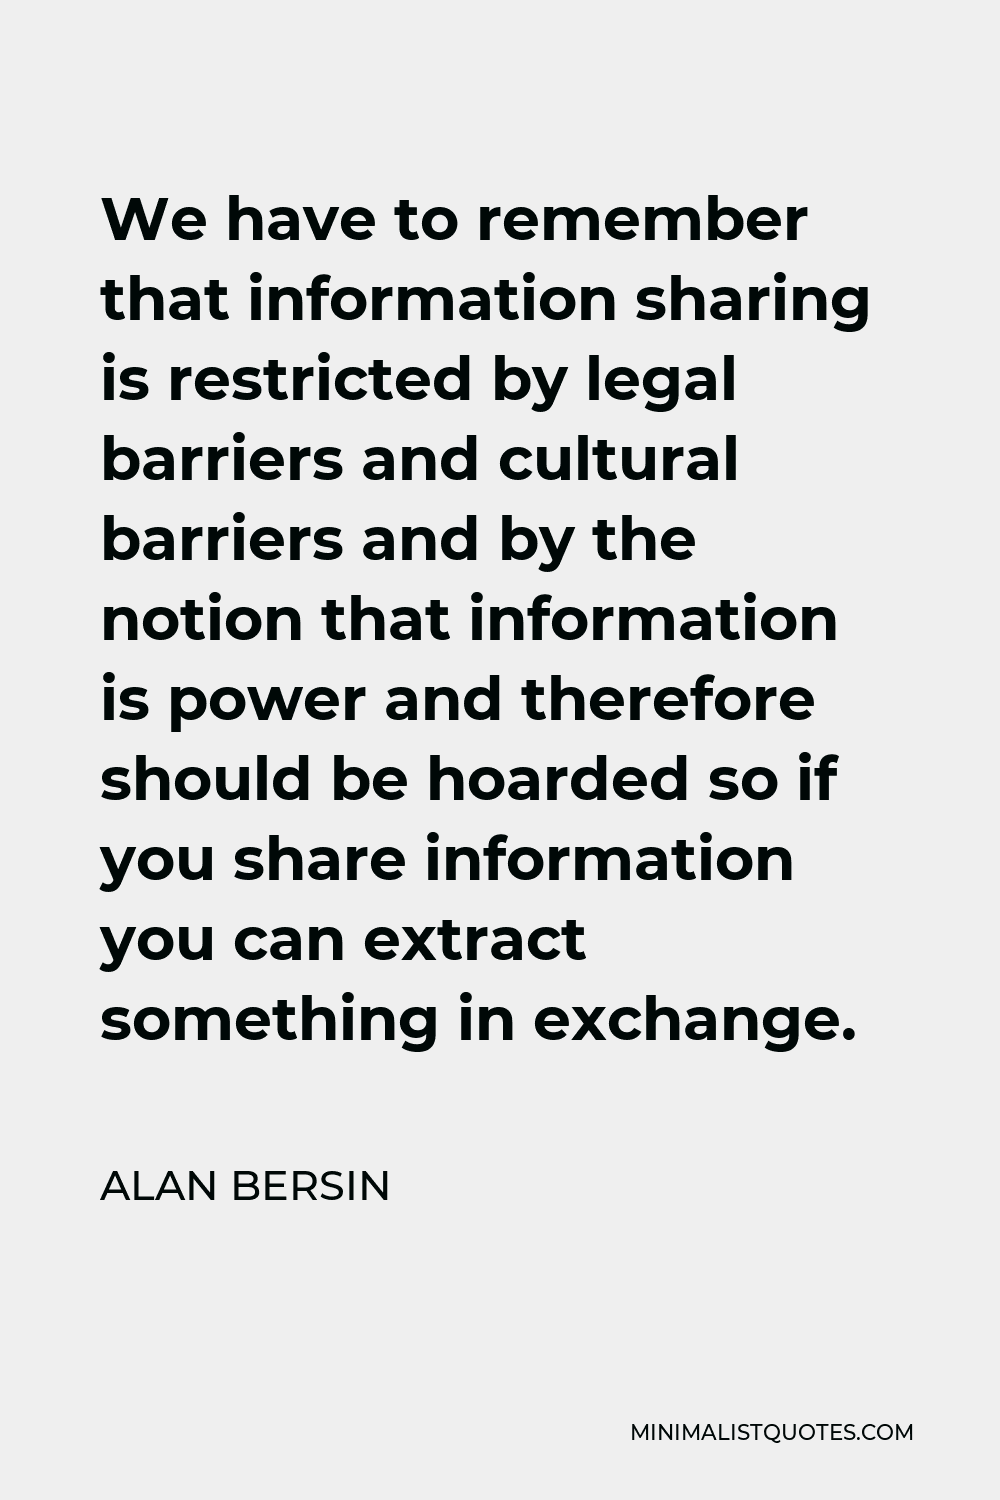 Alan Bersin Quote - We have to remember that information sharing is restricted by legal barriers and cultural barriers and by the notion that information is power and therefore should be hoarded so if you share information you can extract something in exchange.